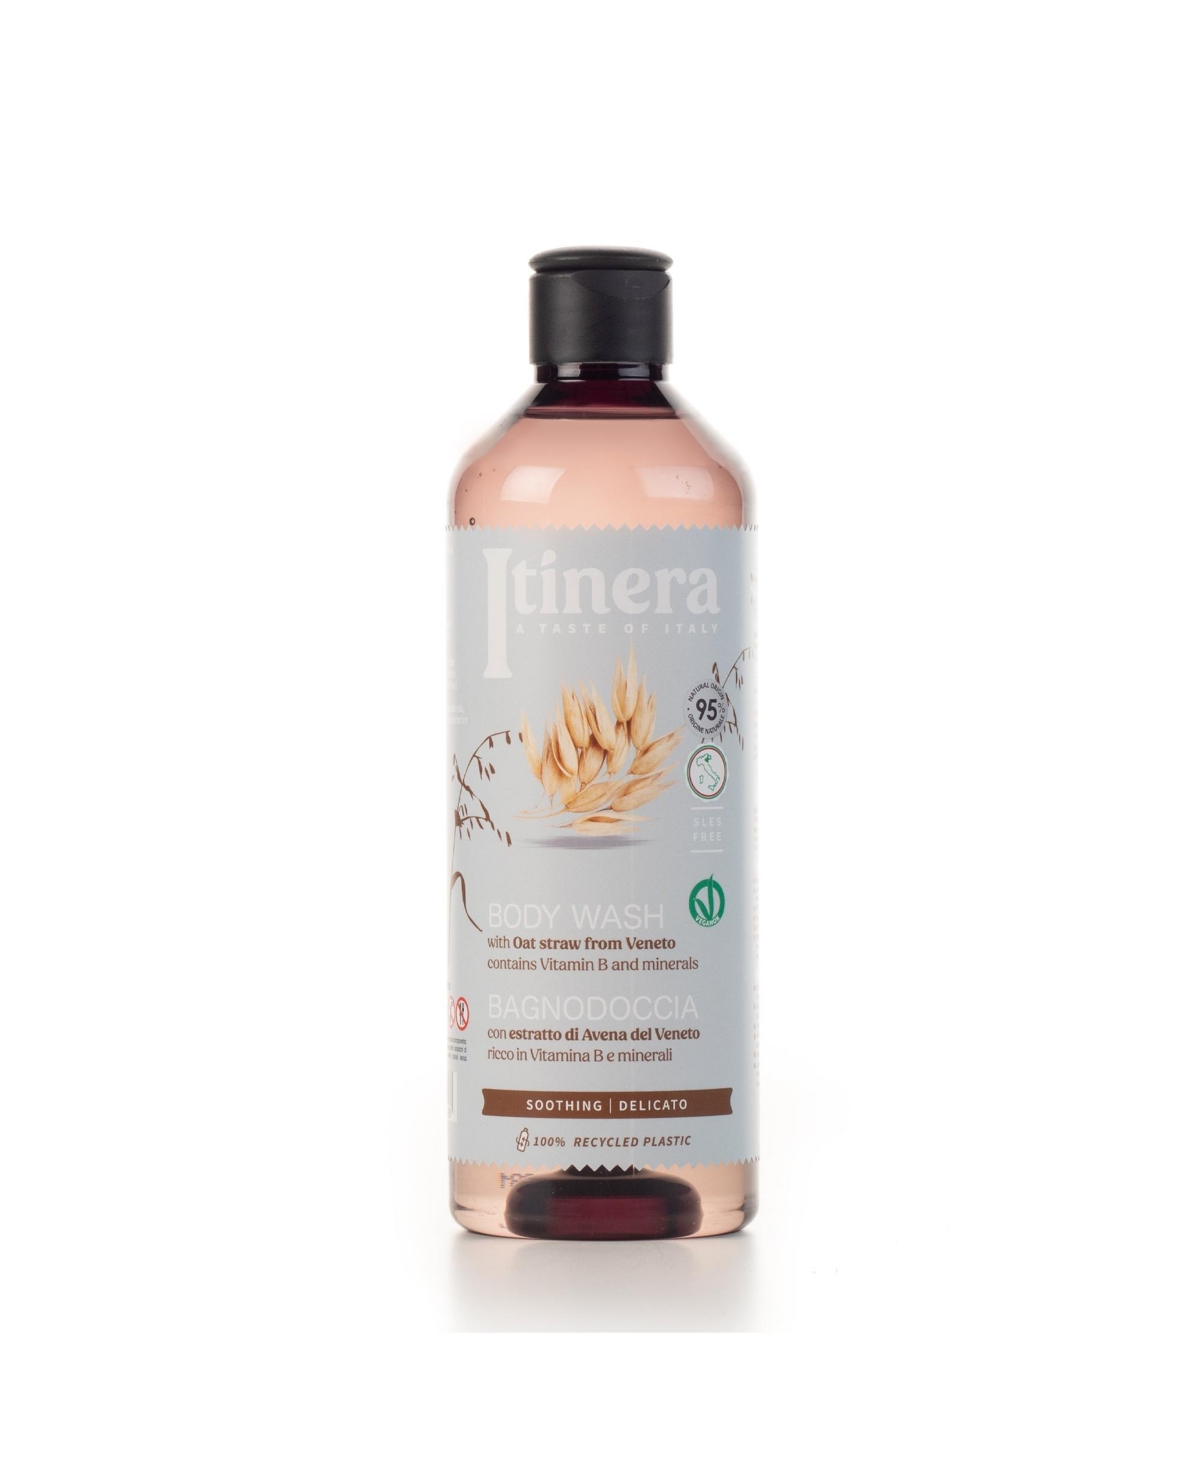 ITINERA SOOTHING BODY WASH